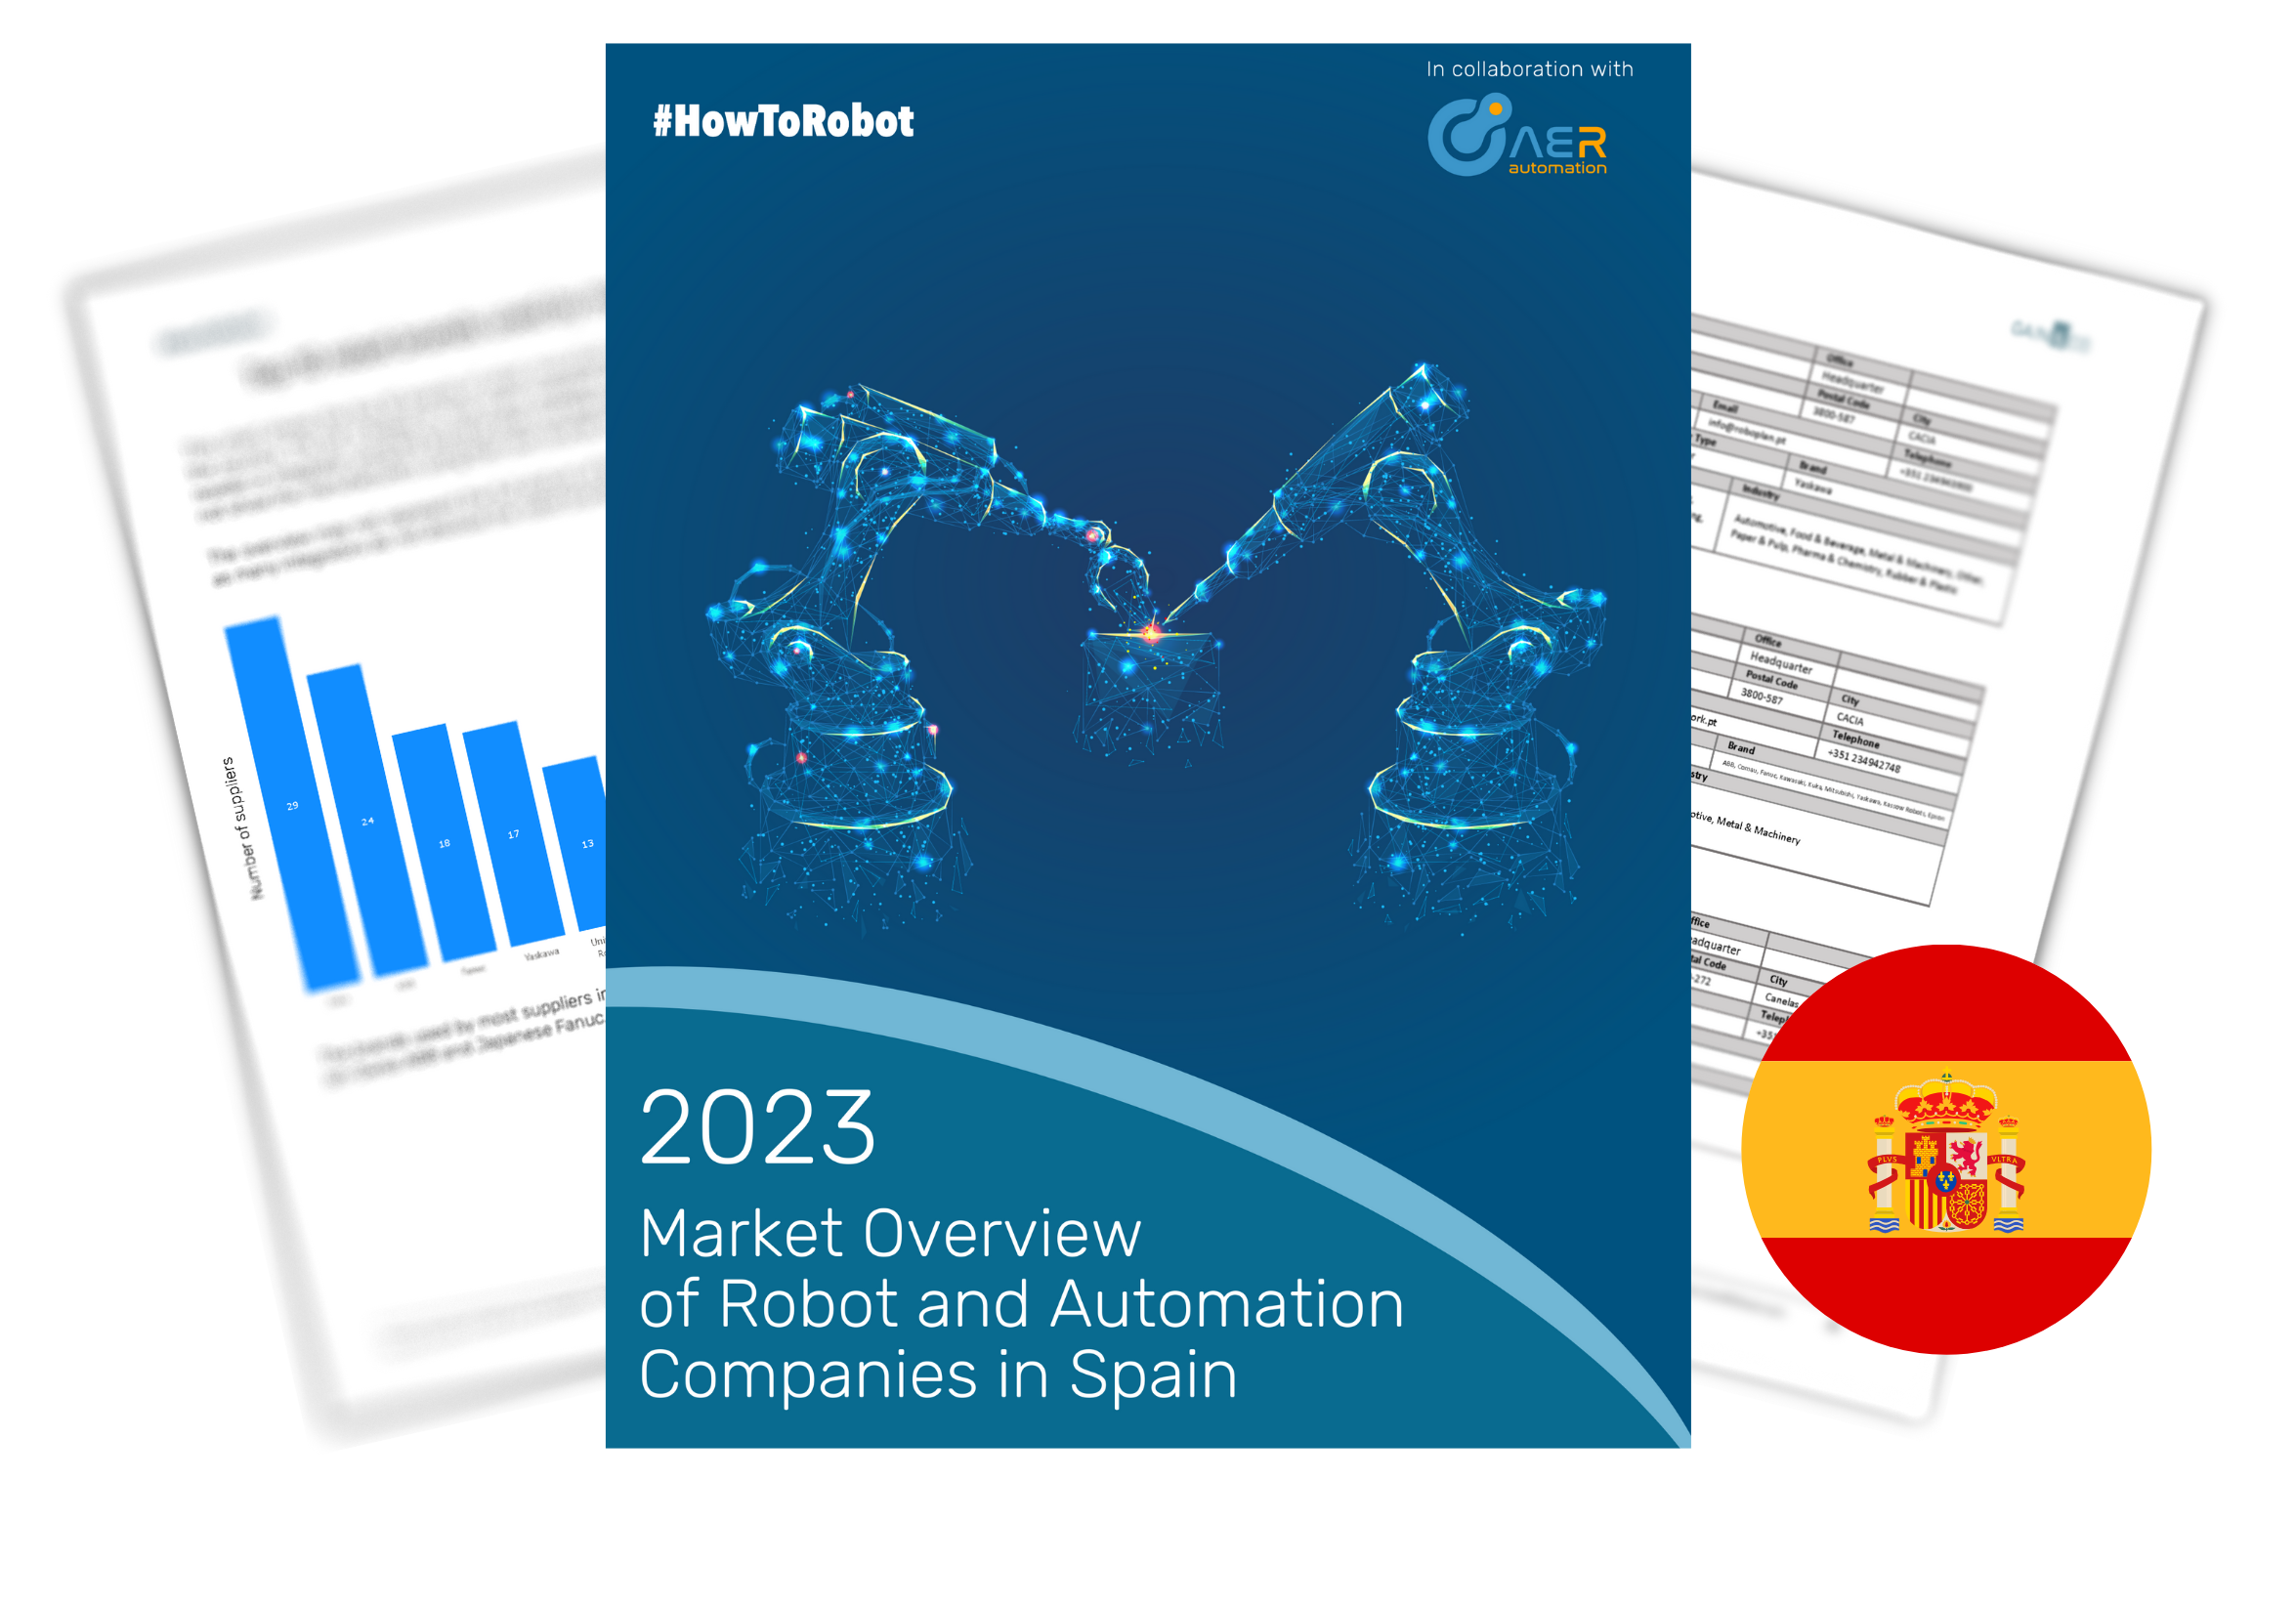 Market Overview of Robot and Automation Companies in Spain